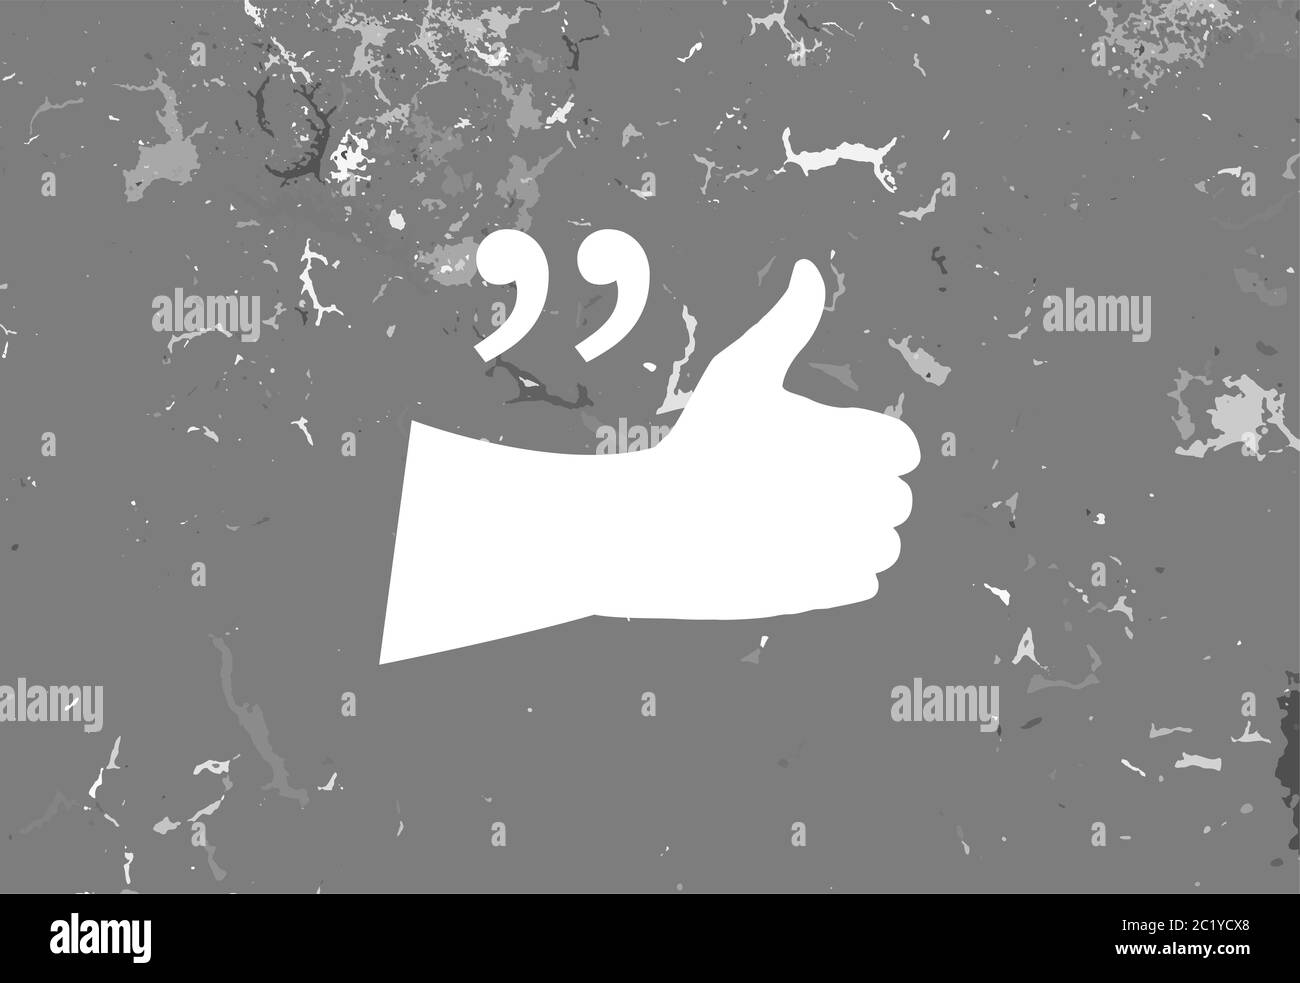 Quotation Mark Speech Bubble. Quote sign icon. Abstract background. Stock Photo